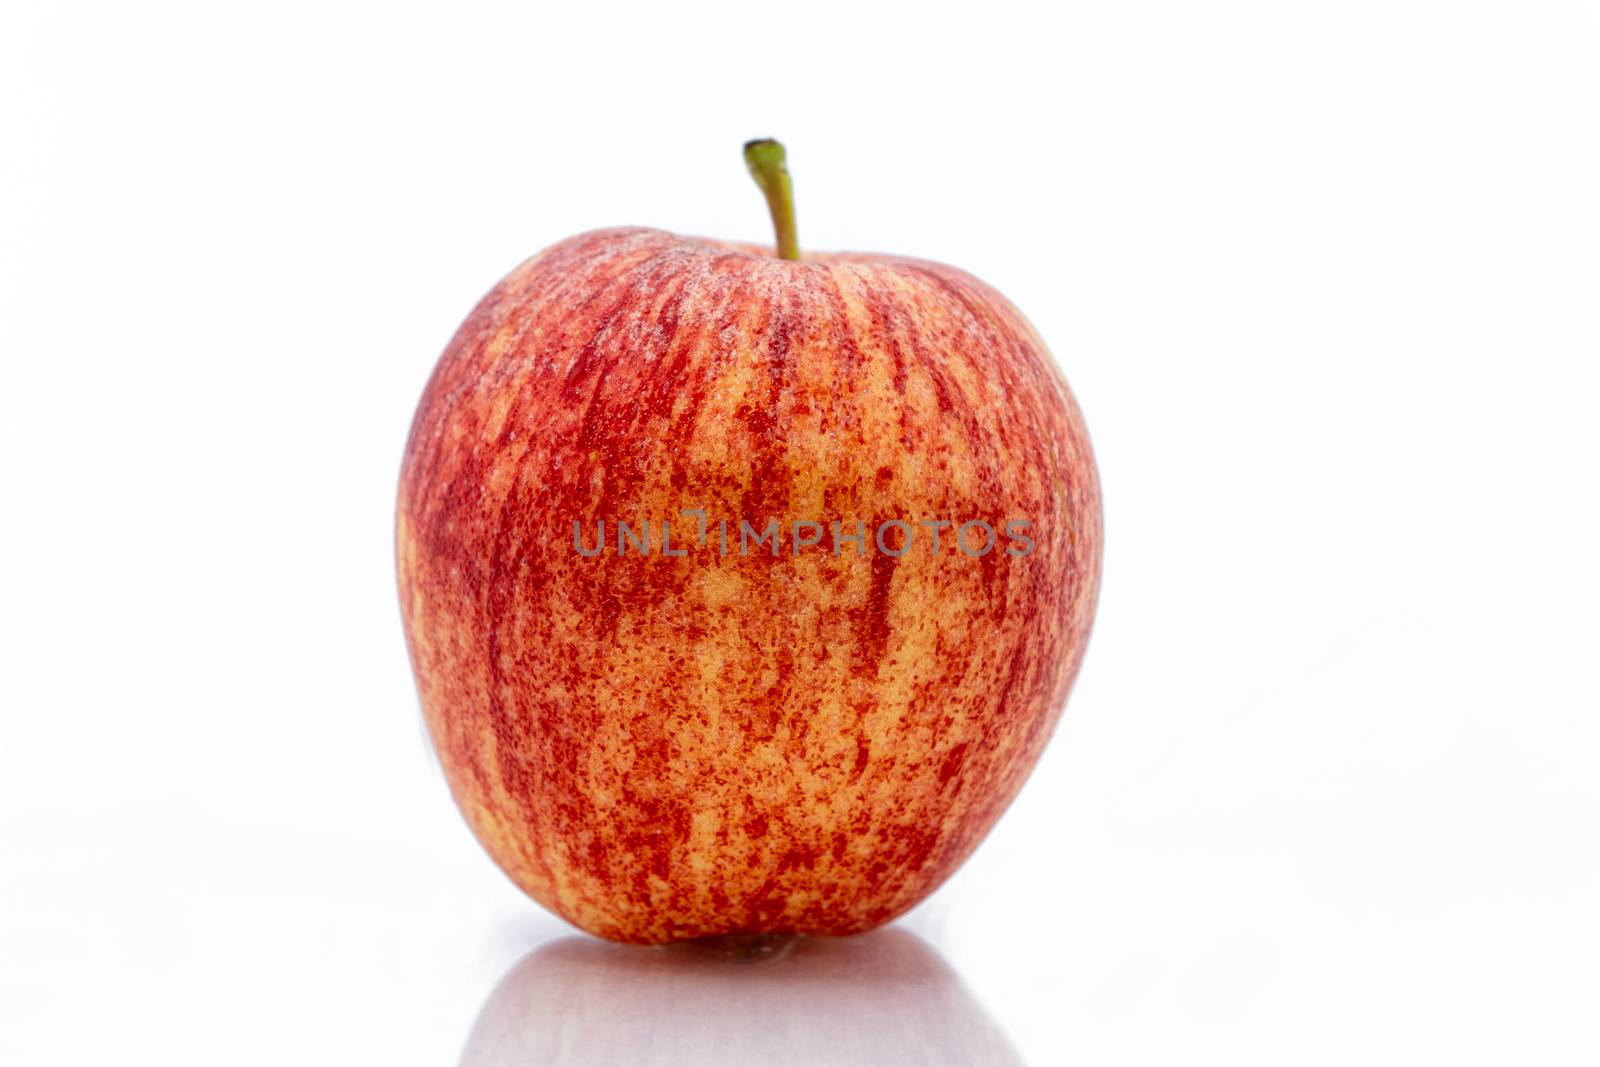 Red apple isolated on a white background, Apples are one of the most popular fruits for health benefits. by peerapixs